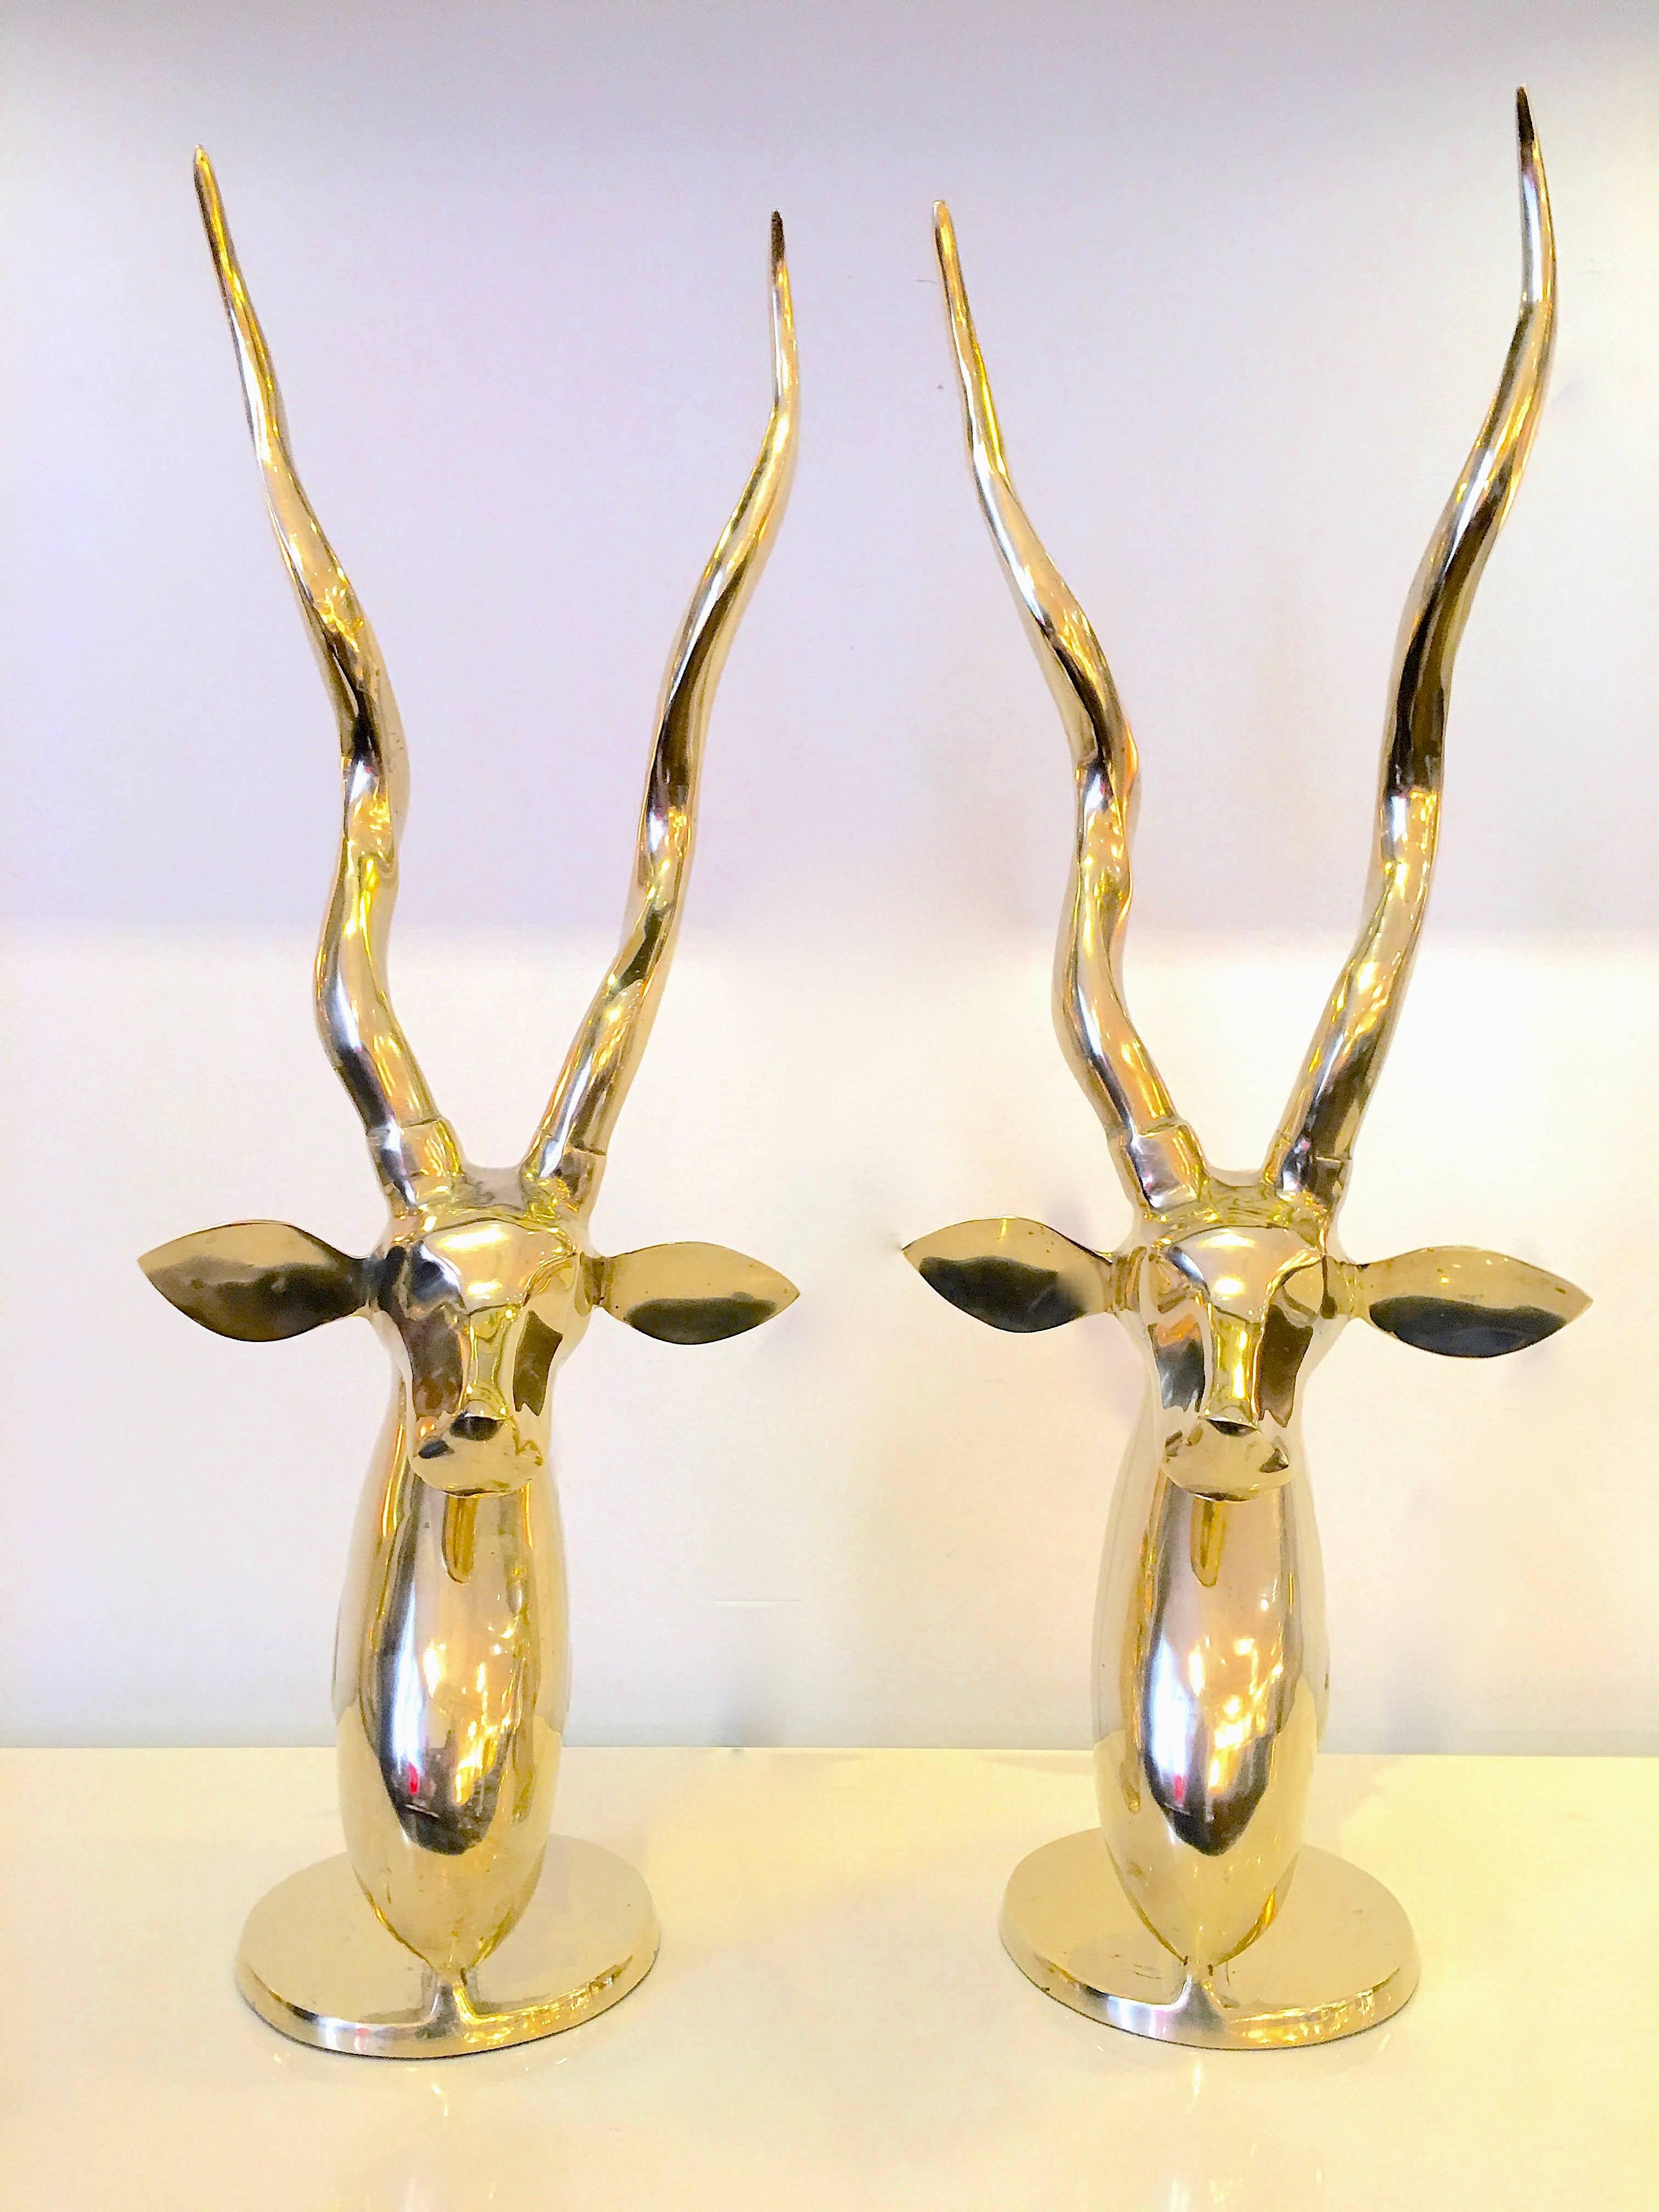 Impressive pair of gazelles finished in a gleaming polished brass. Fantastic accent pieces! Please contact for location. 